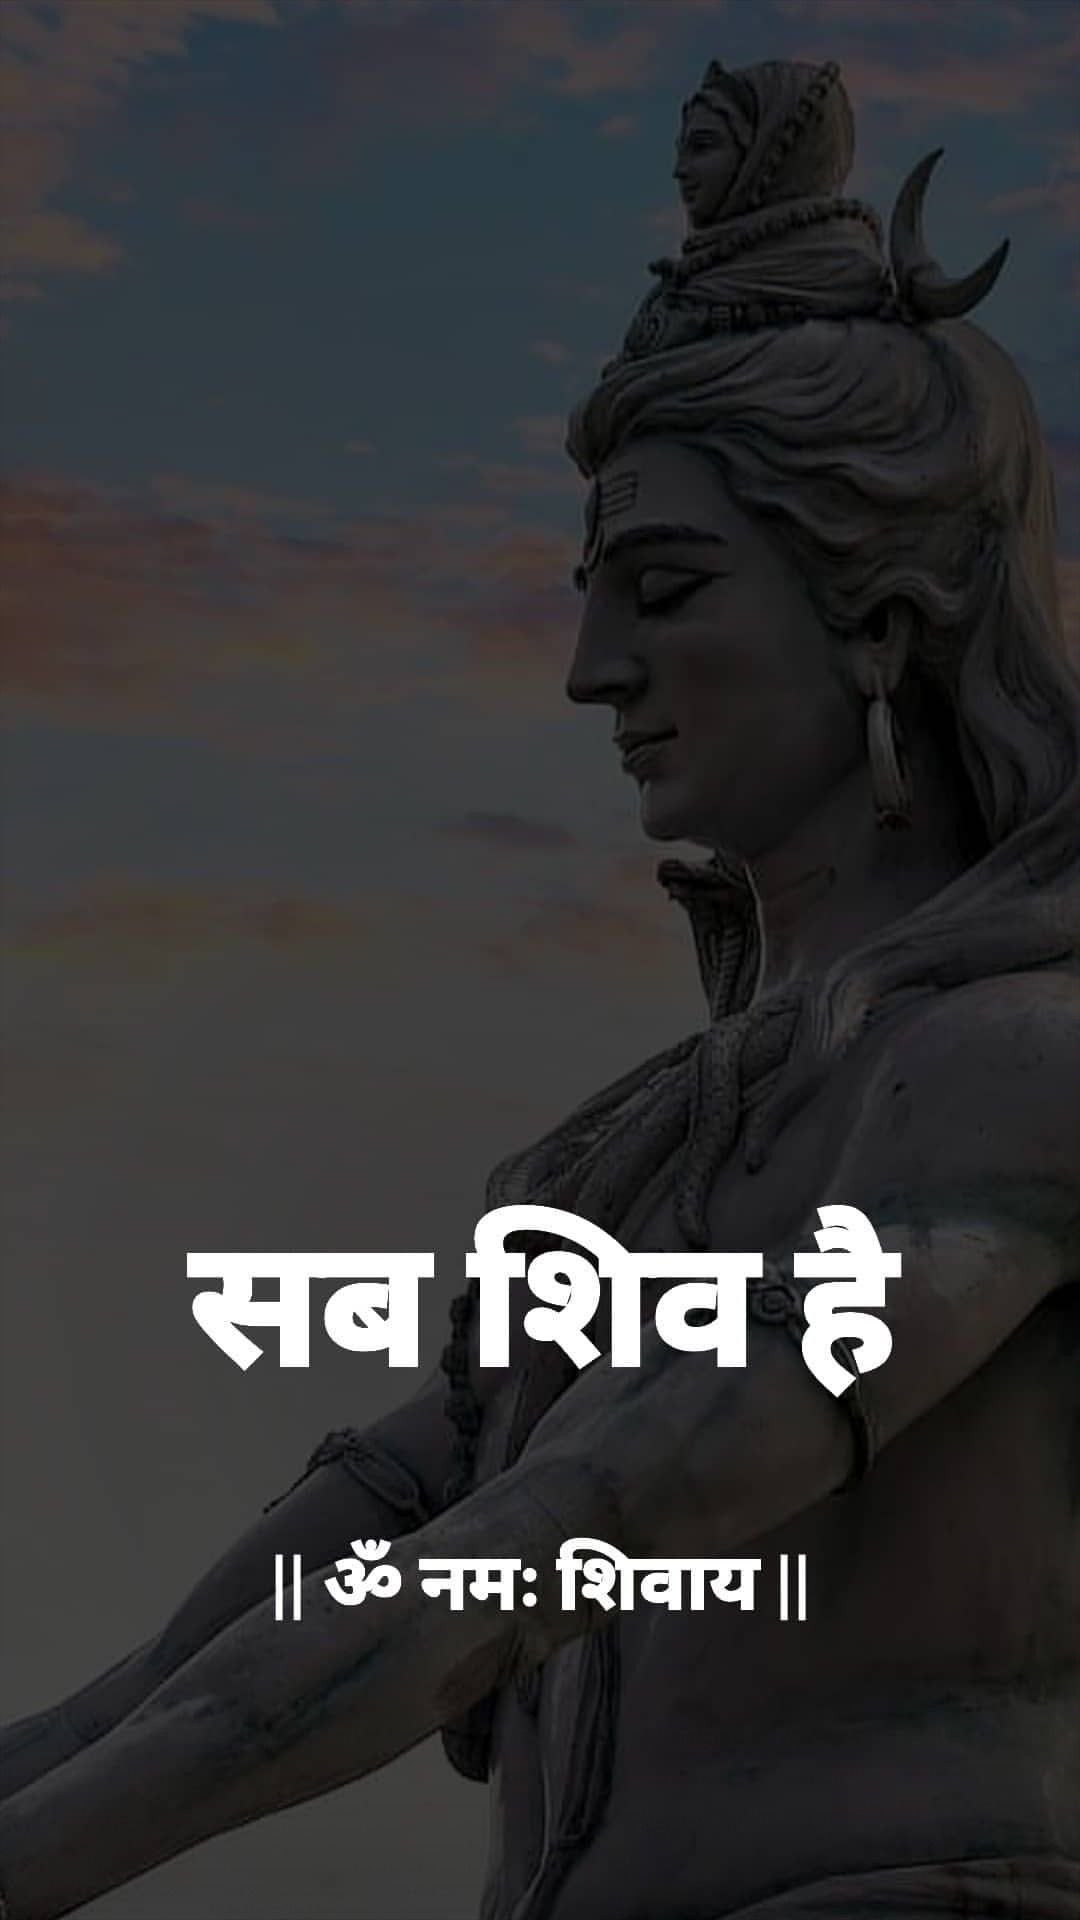 lord shiva hd wallpapers 1920x1080 download for pc